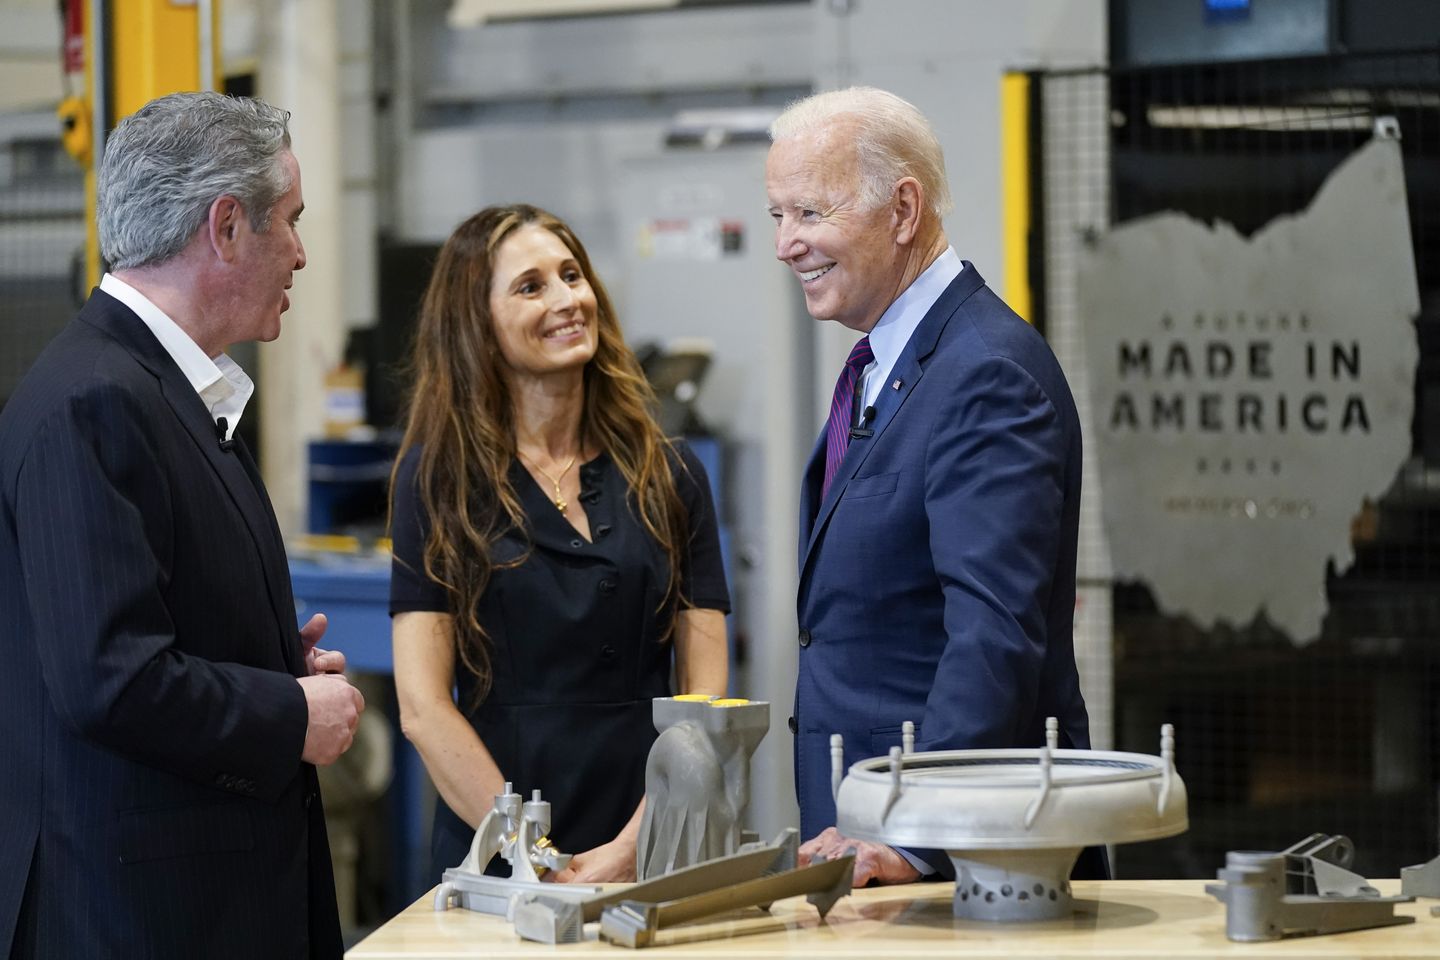 Biden plays up jobs gains but can't shake bigger economic woes